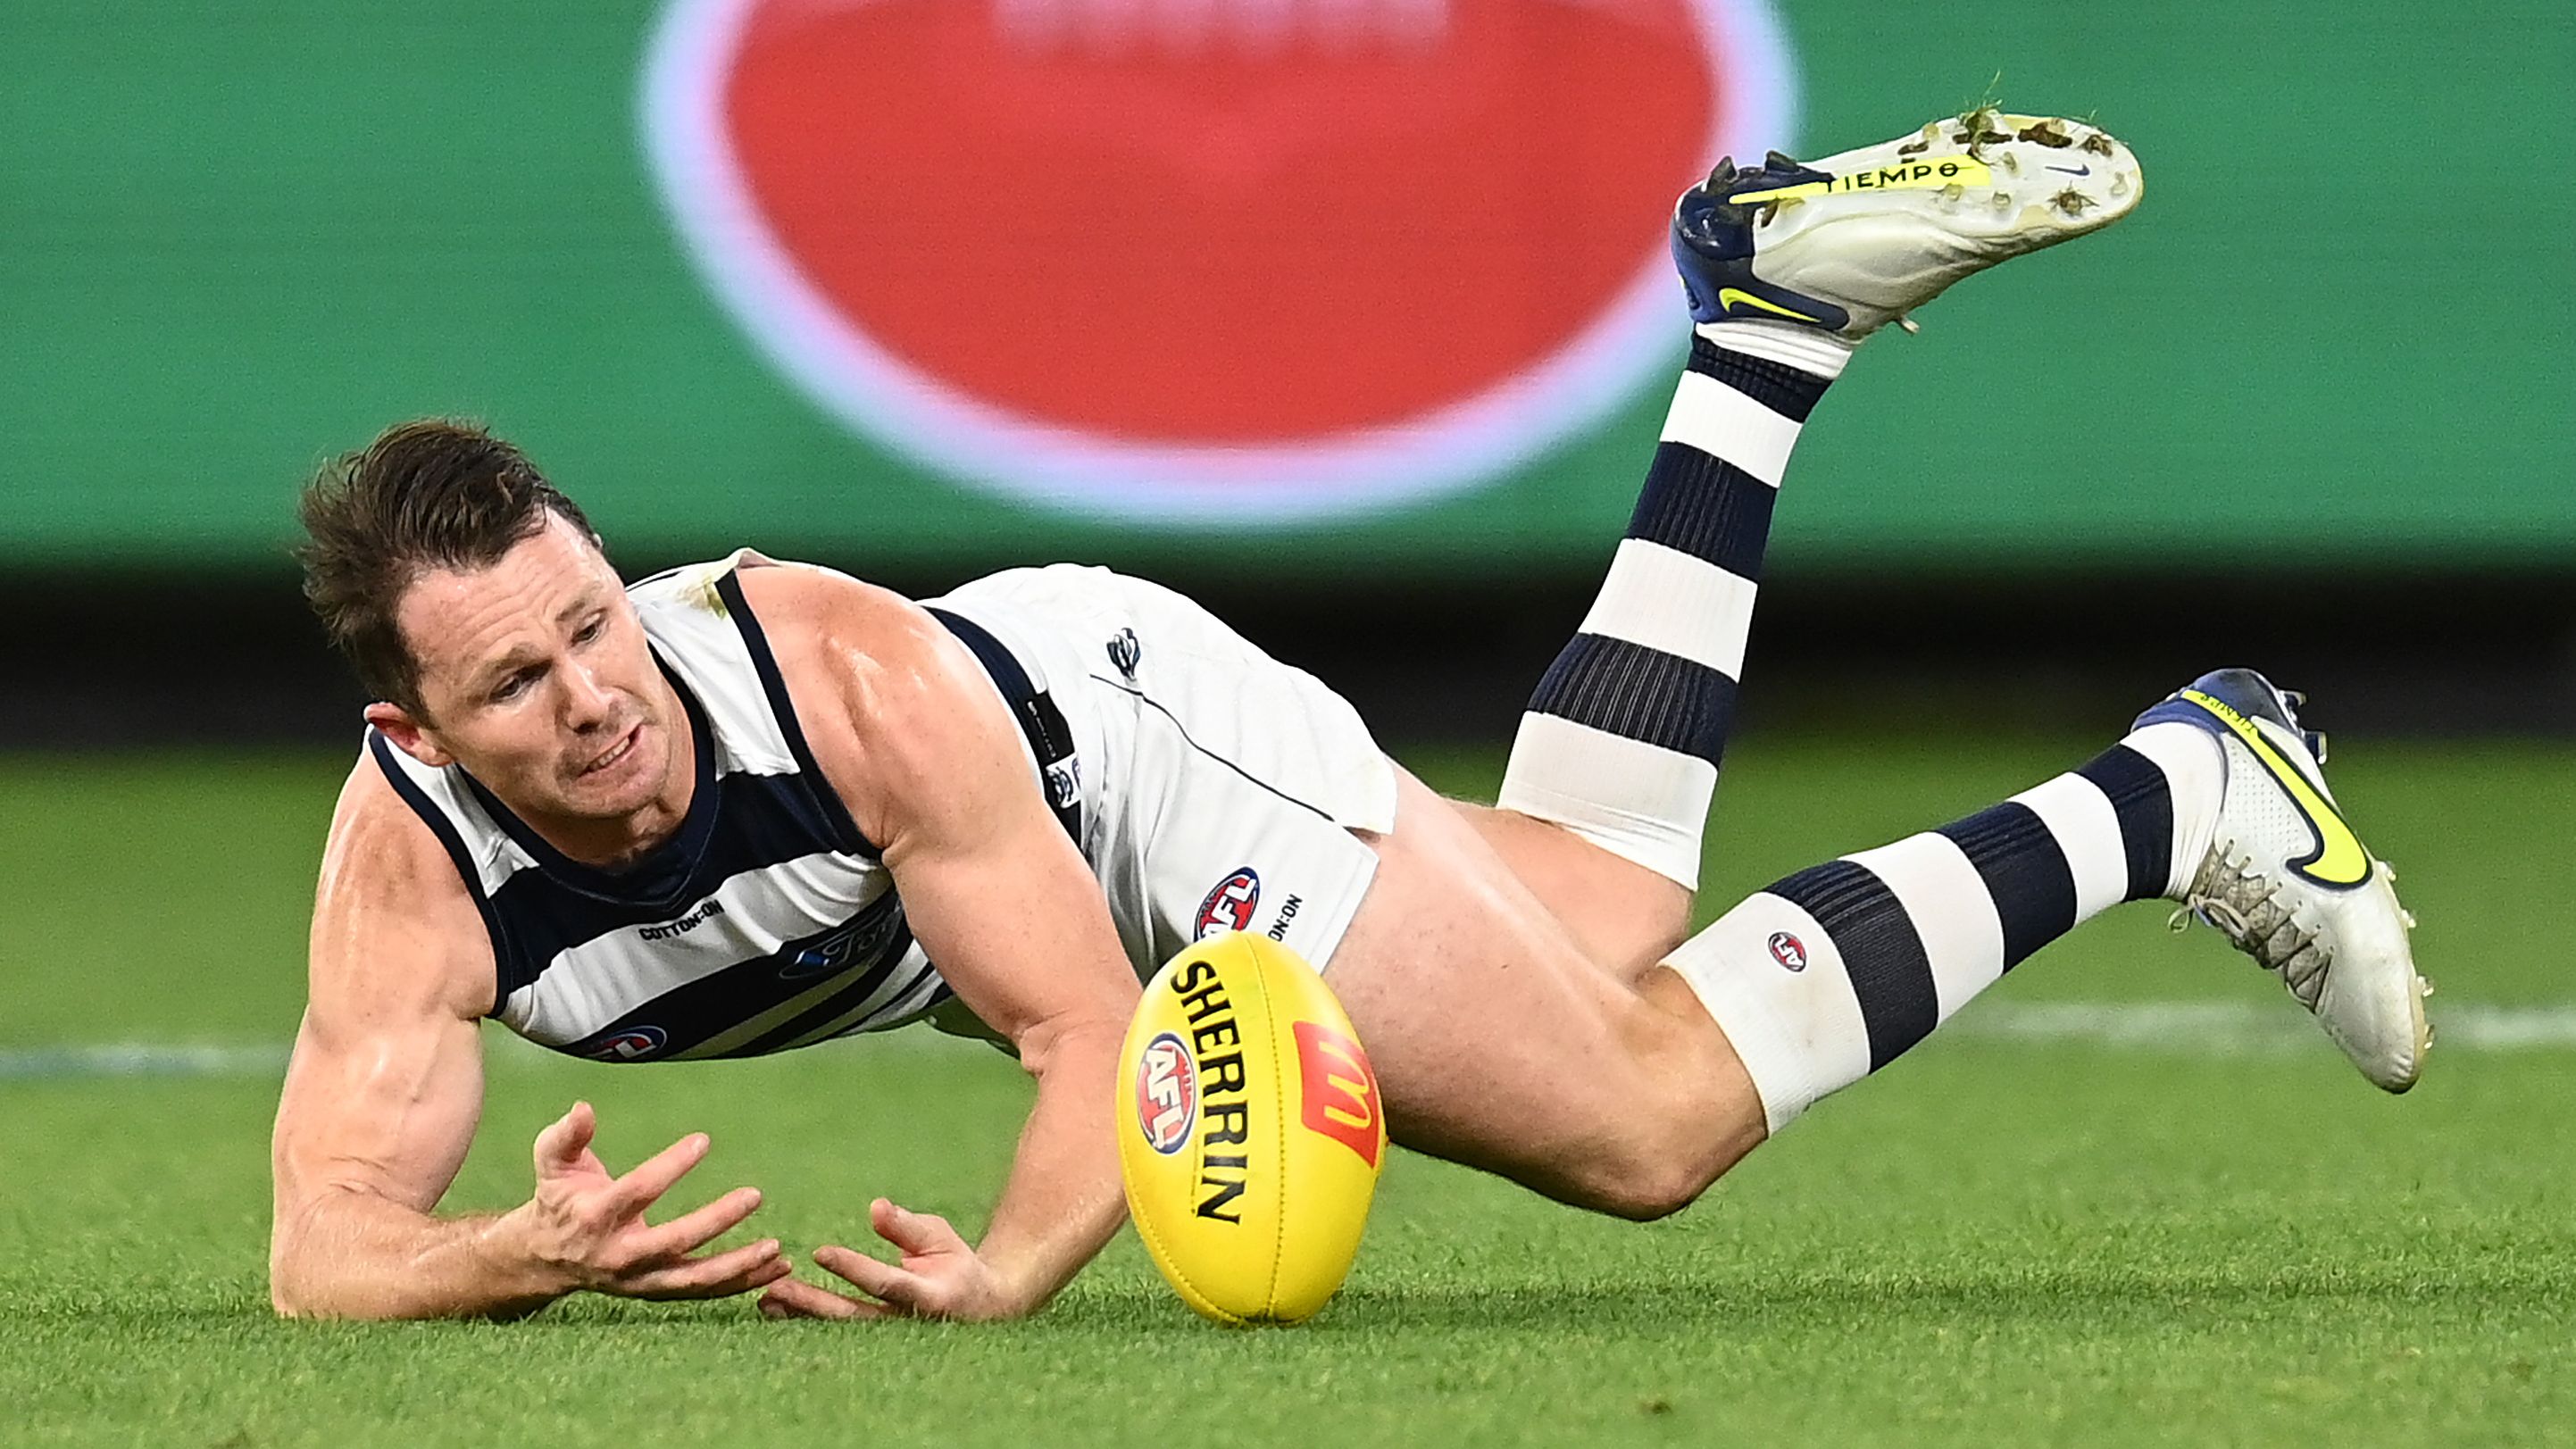 Patrick Dangerfield of the Cats dives for a mark.